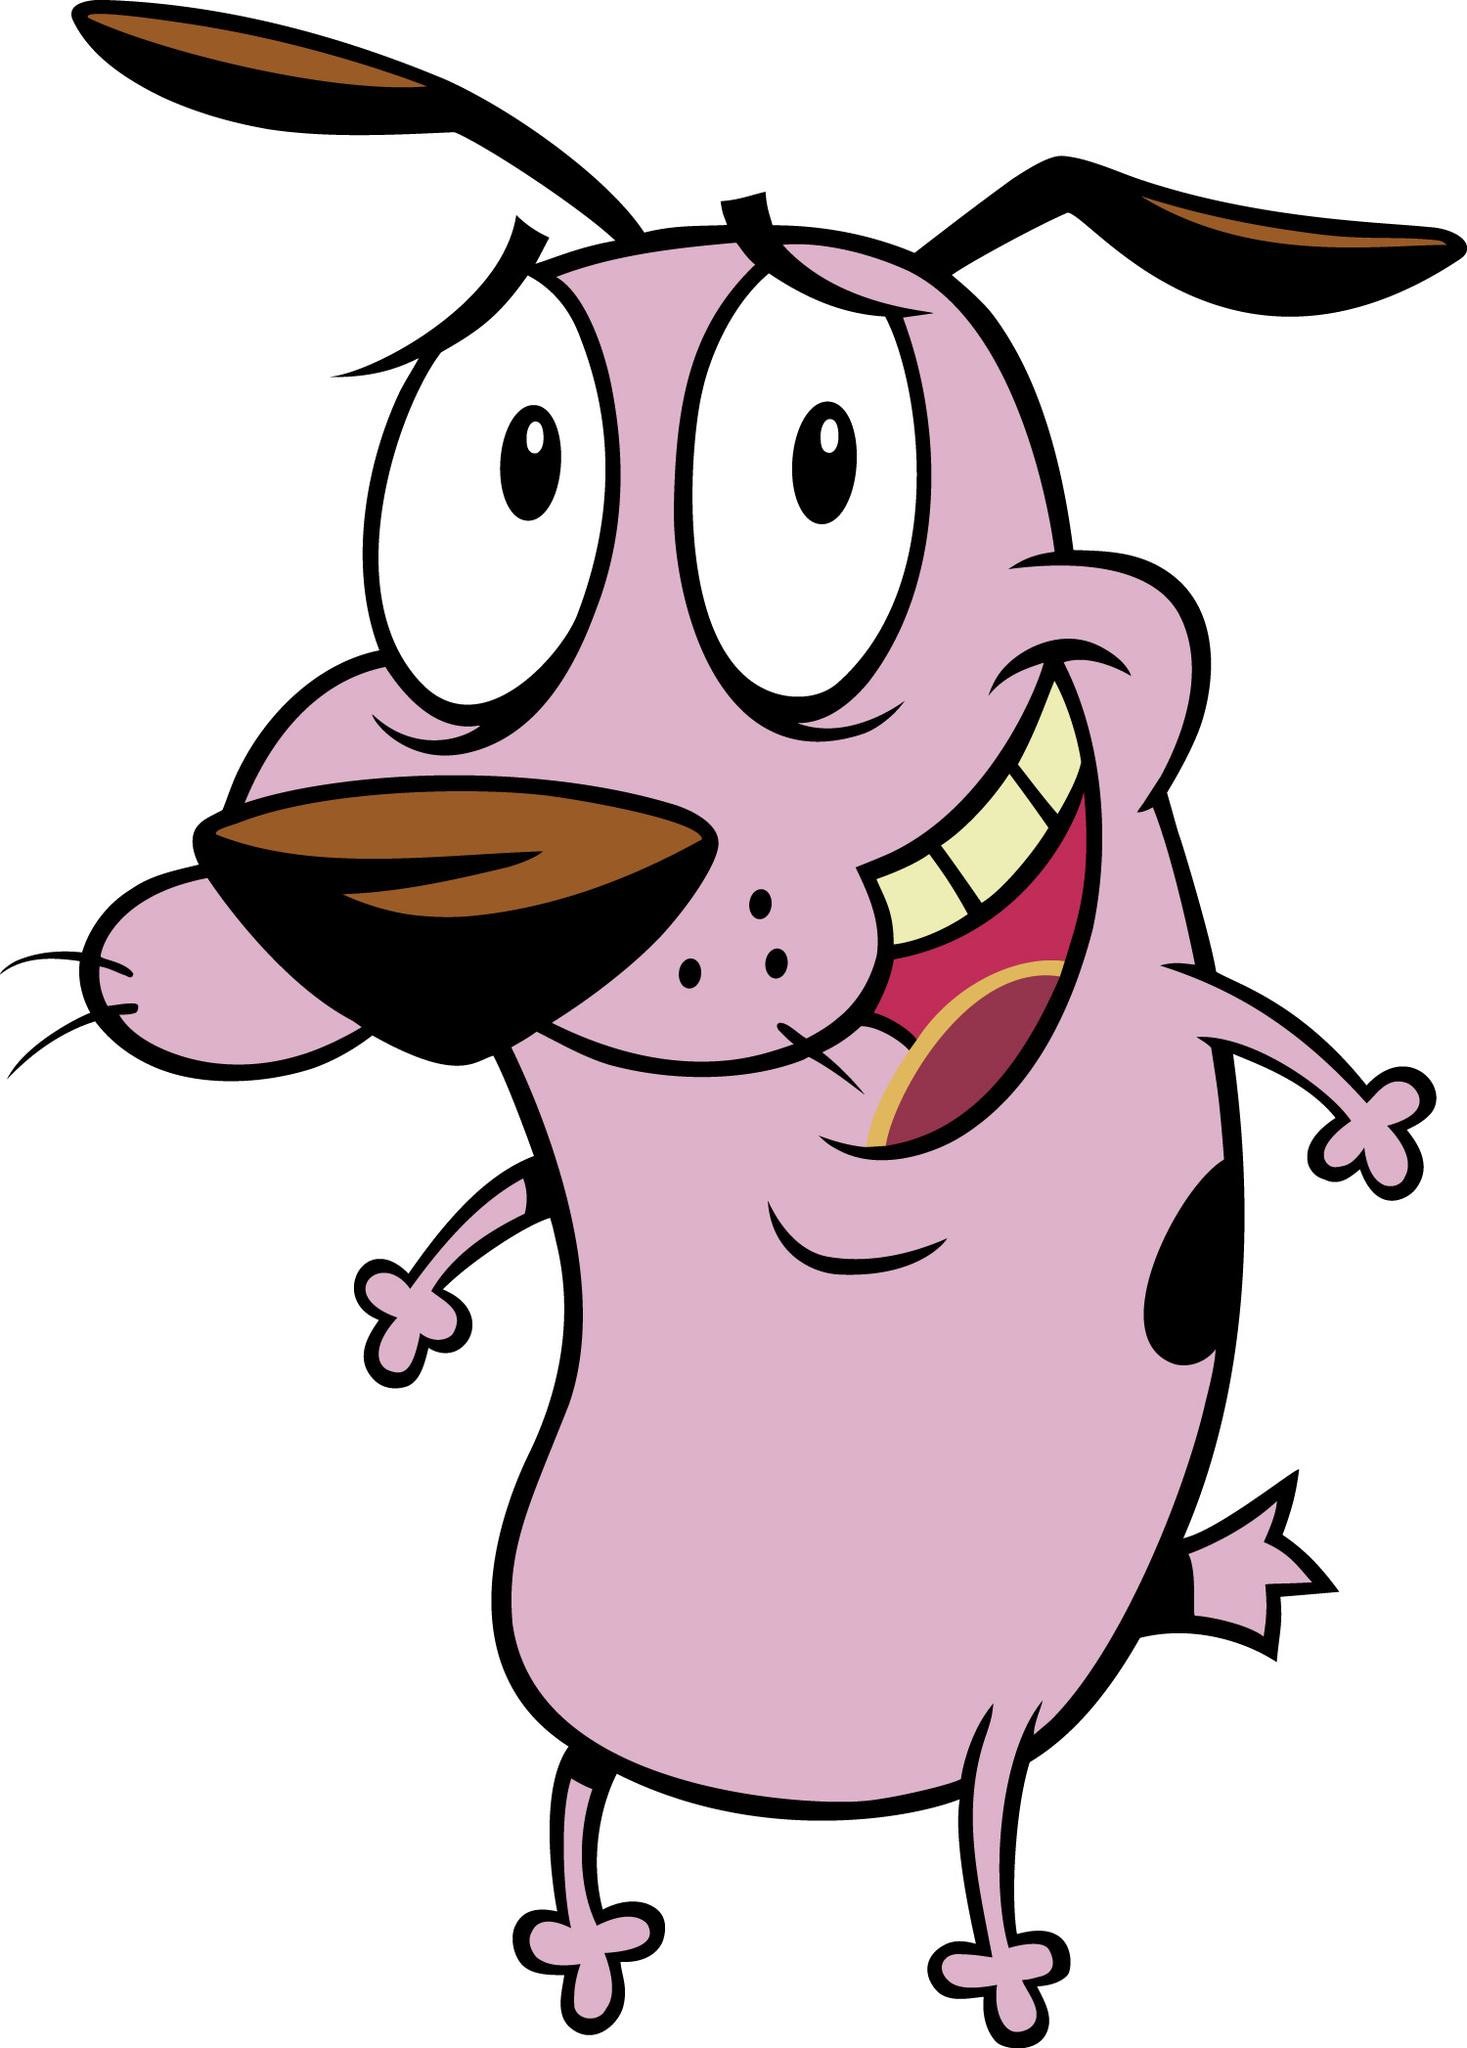 Courage the Cowardly Dog Stickers